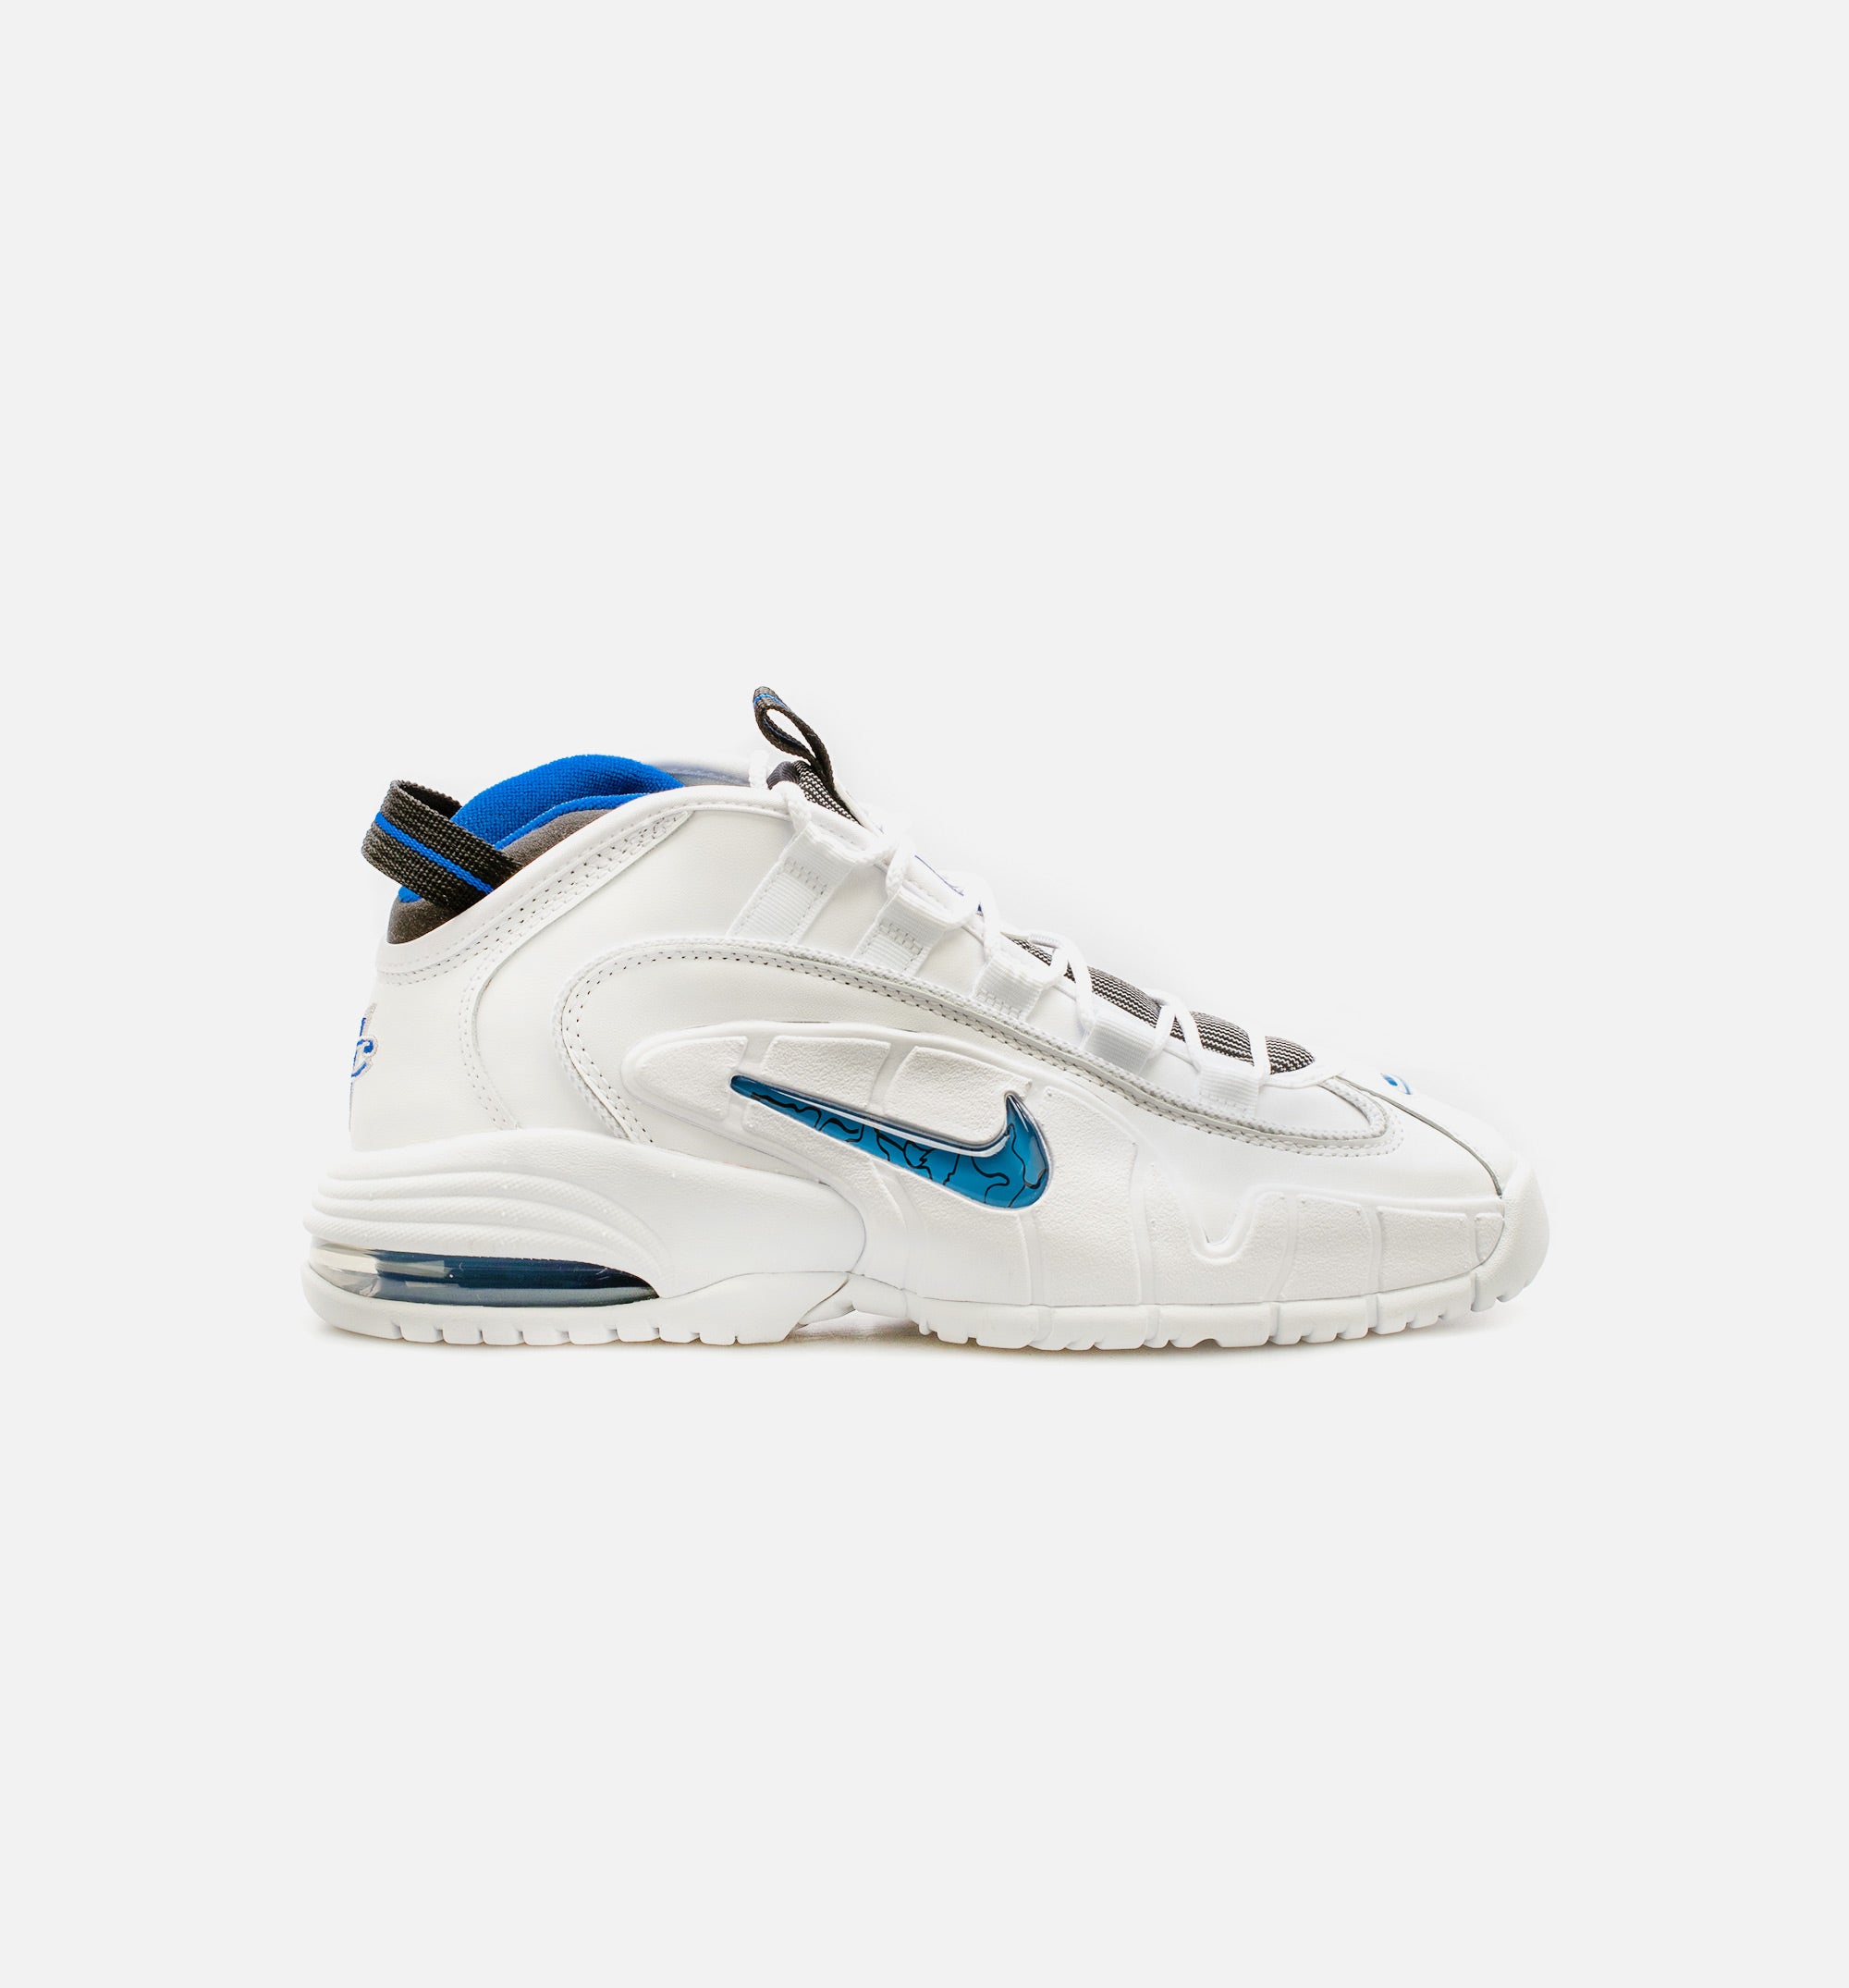 Size+9+-+Nike+Air+Max+Uptempo+95+Orlando+Magic for sale online